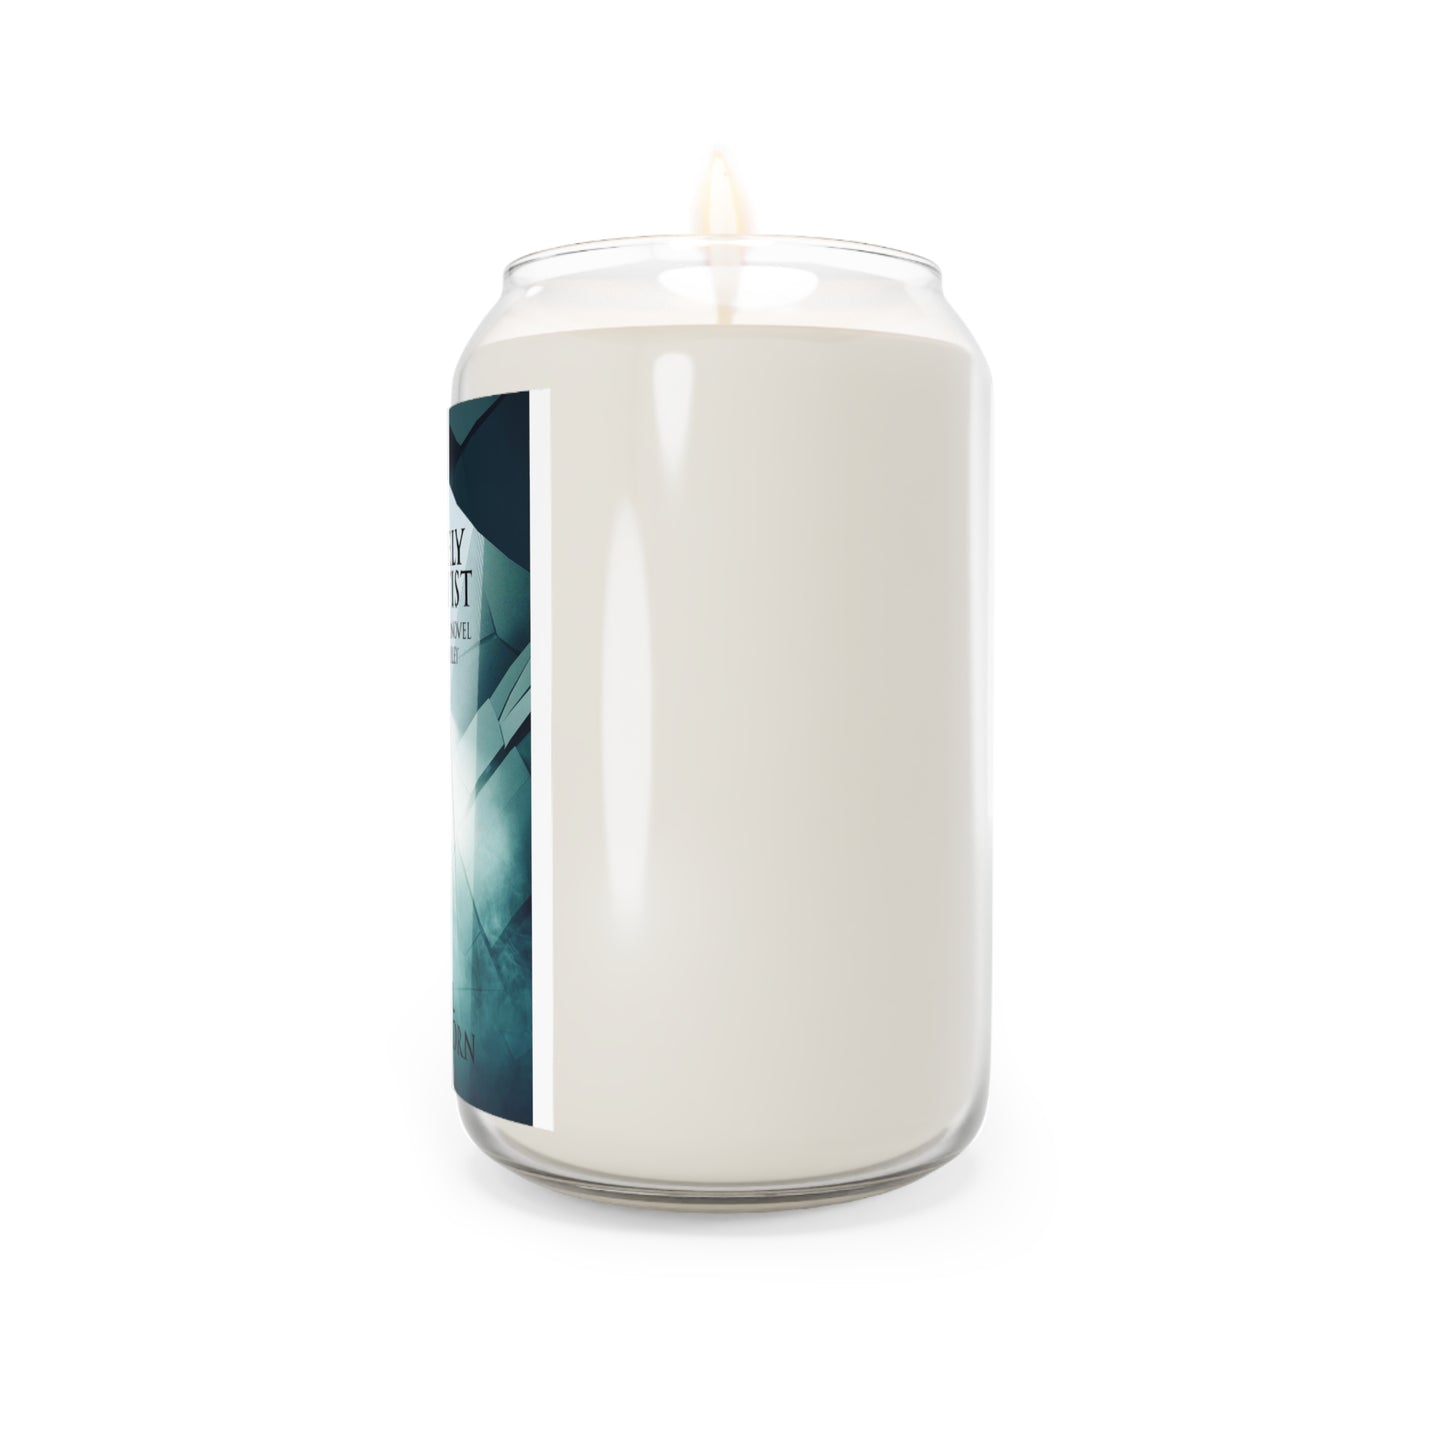 The Unlikely Occultist - Scented Candle